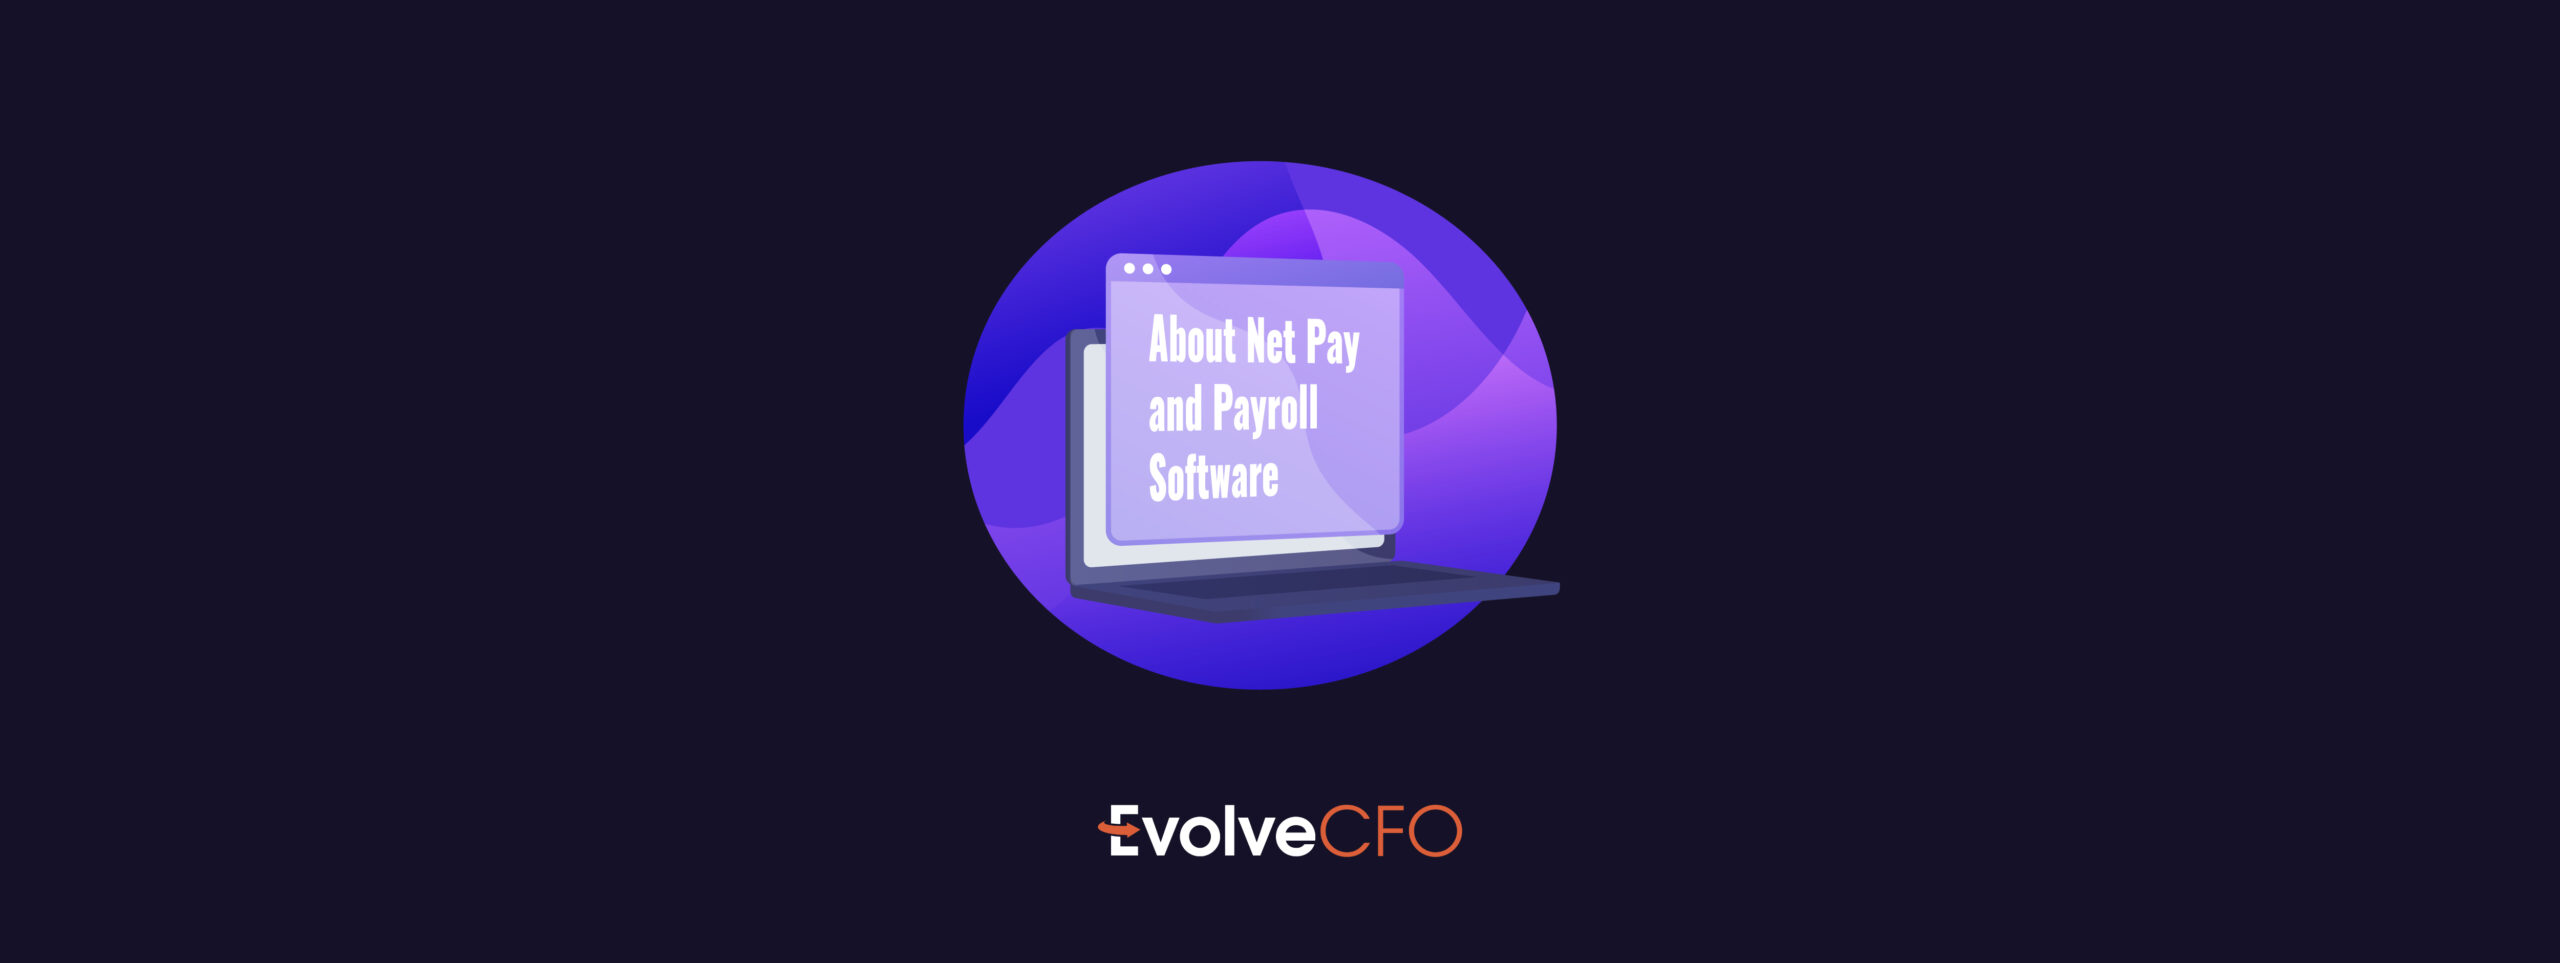 Learning about net pay and payroll software for small businesses